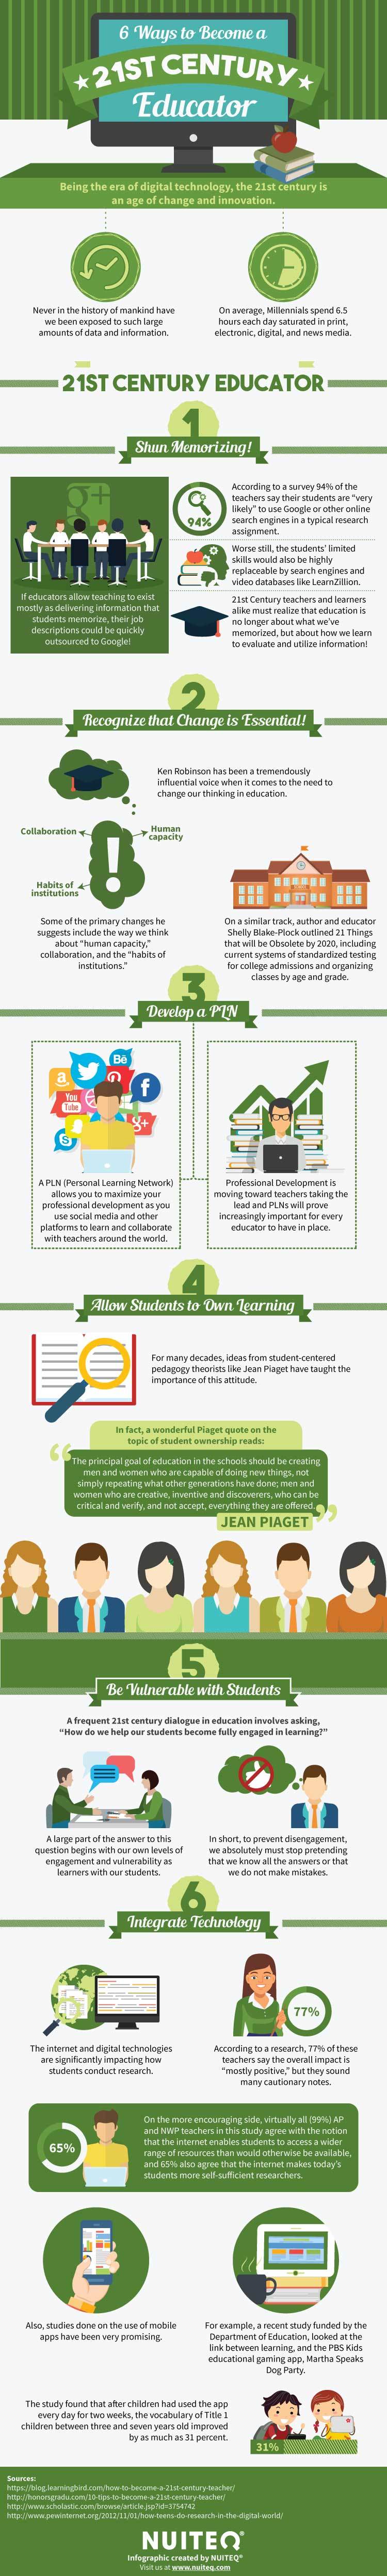 6 Ways to Become a 21st Century Teacher Infographic